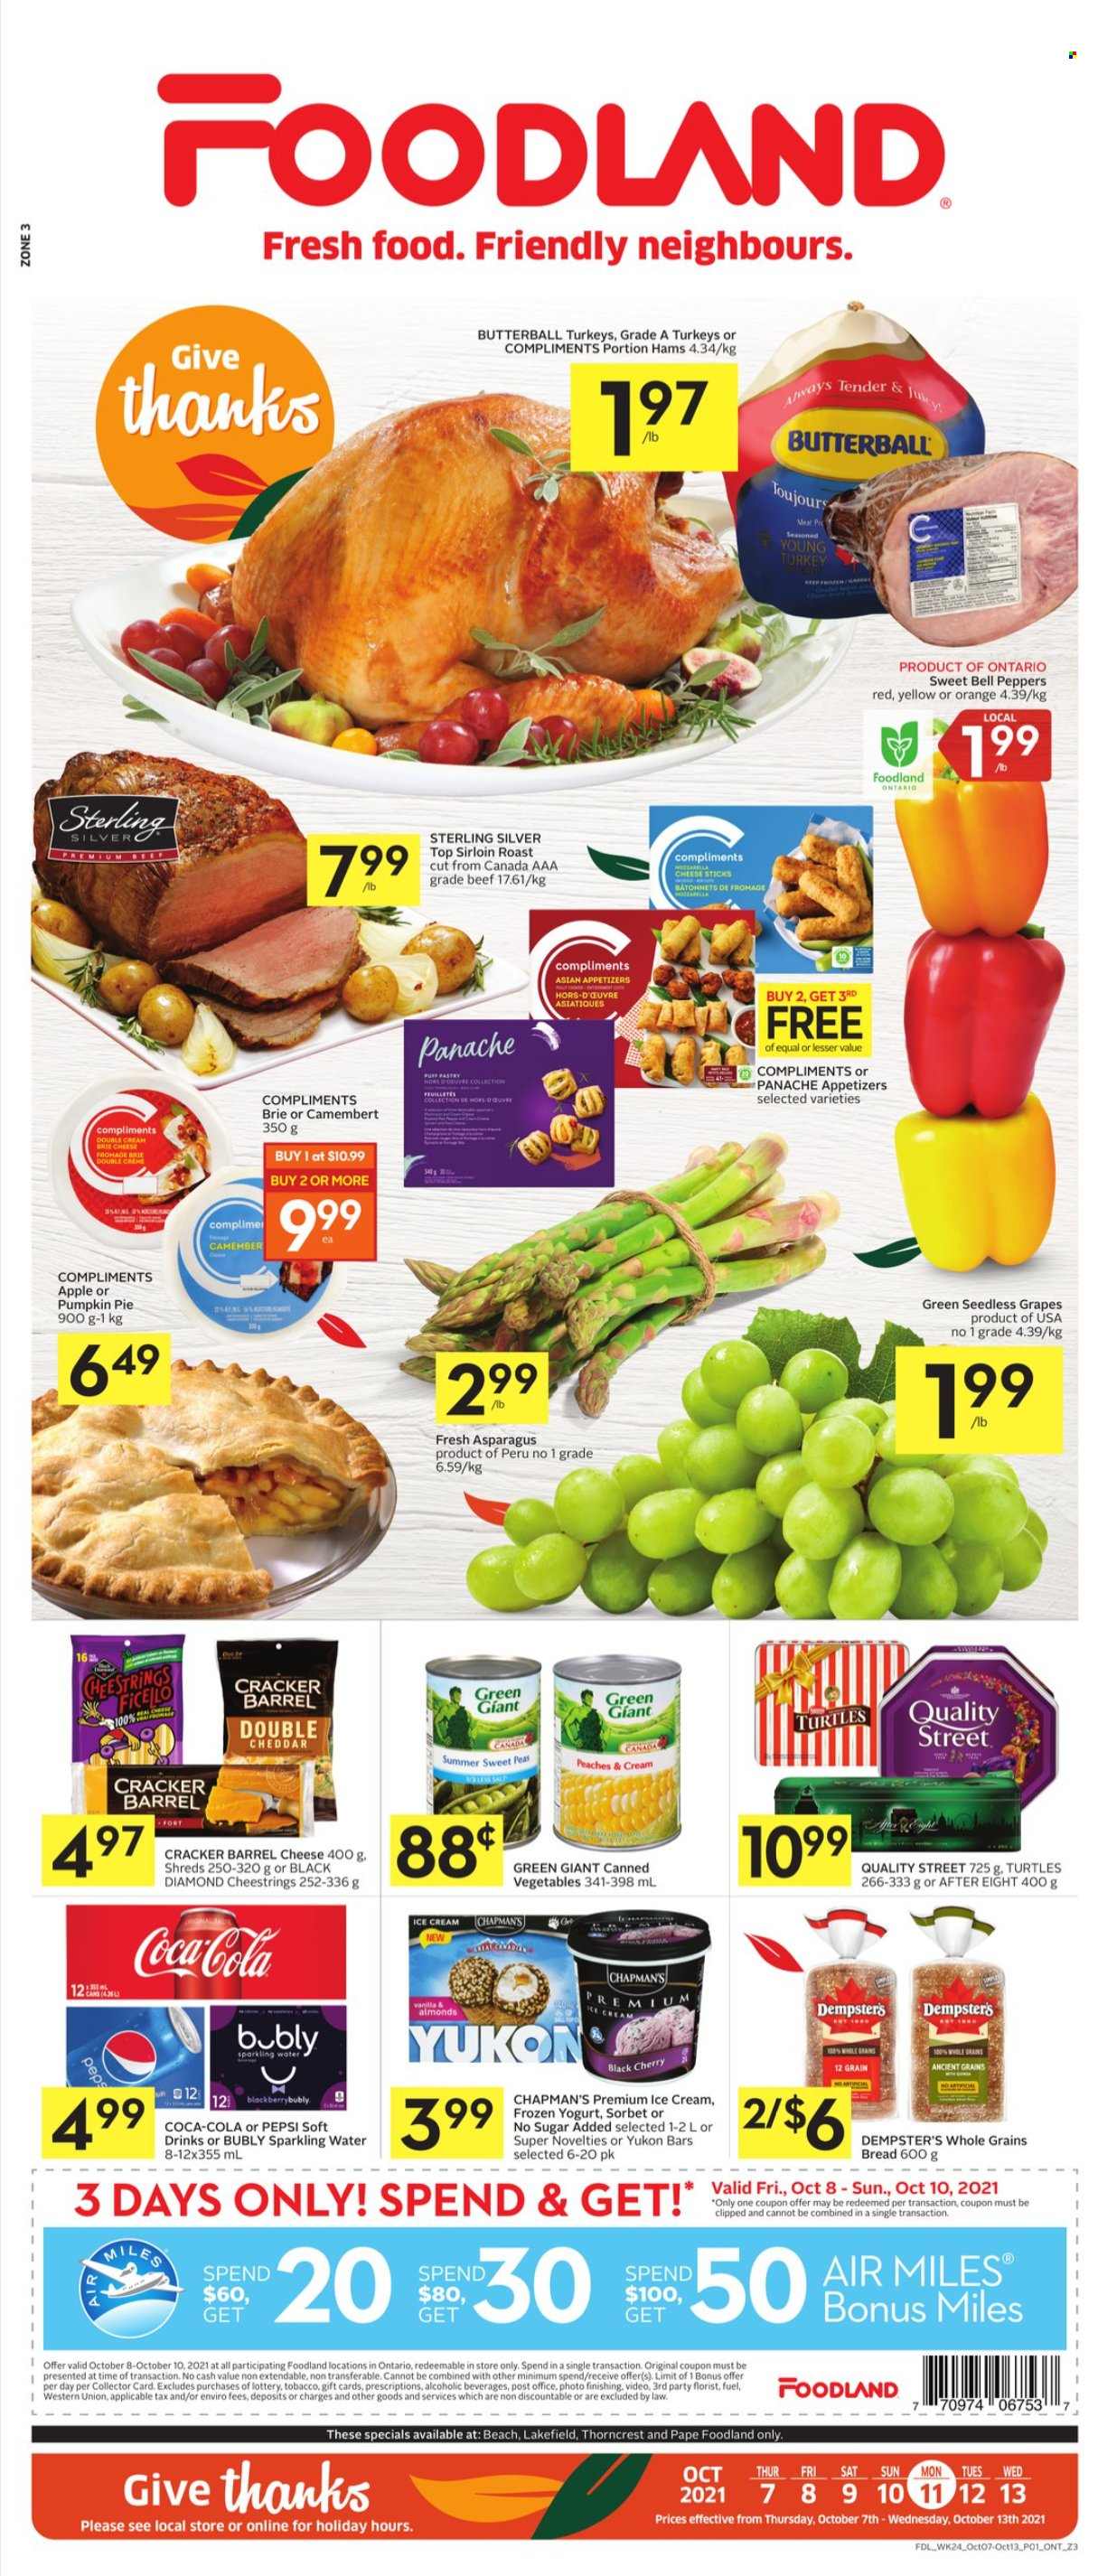 thumbnail - Foodland Flyer - October 07, 2021 - October 13, 2021 - Sales products - bread, pie, asparagus, bell peppers, pumpkin, peas, peppers, grapes, seedless grapes, peaches, Butterball, string cheese, cheddar, cheese, brie, yoghurt, ice cream, crackers, After Eight, canned vegetables, almonds, Coca-Cola, Pepsi, soft drink, sparkling water, camembert, oranges. Page 1.